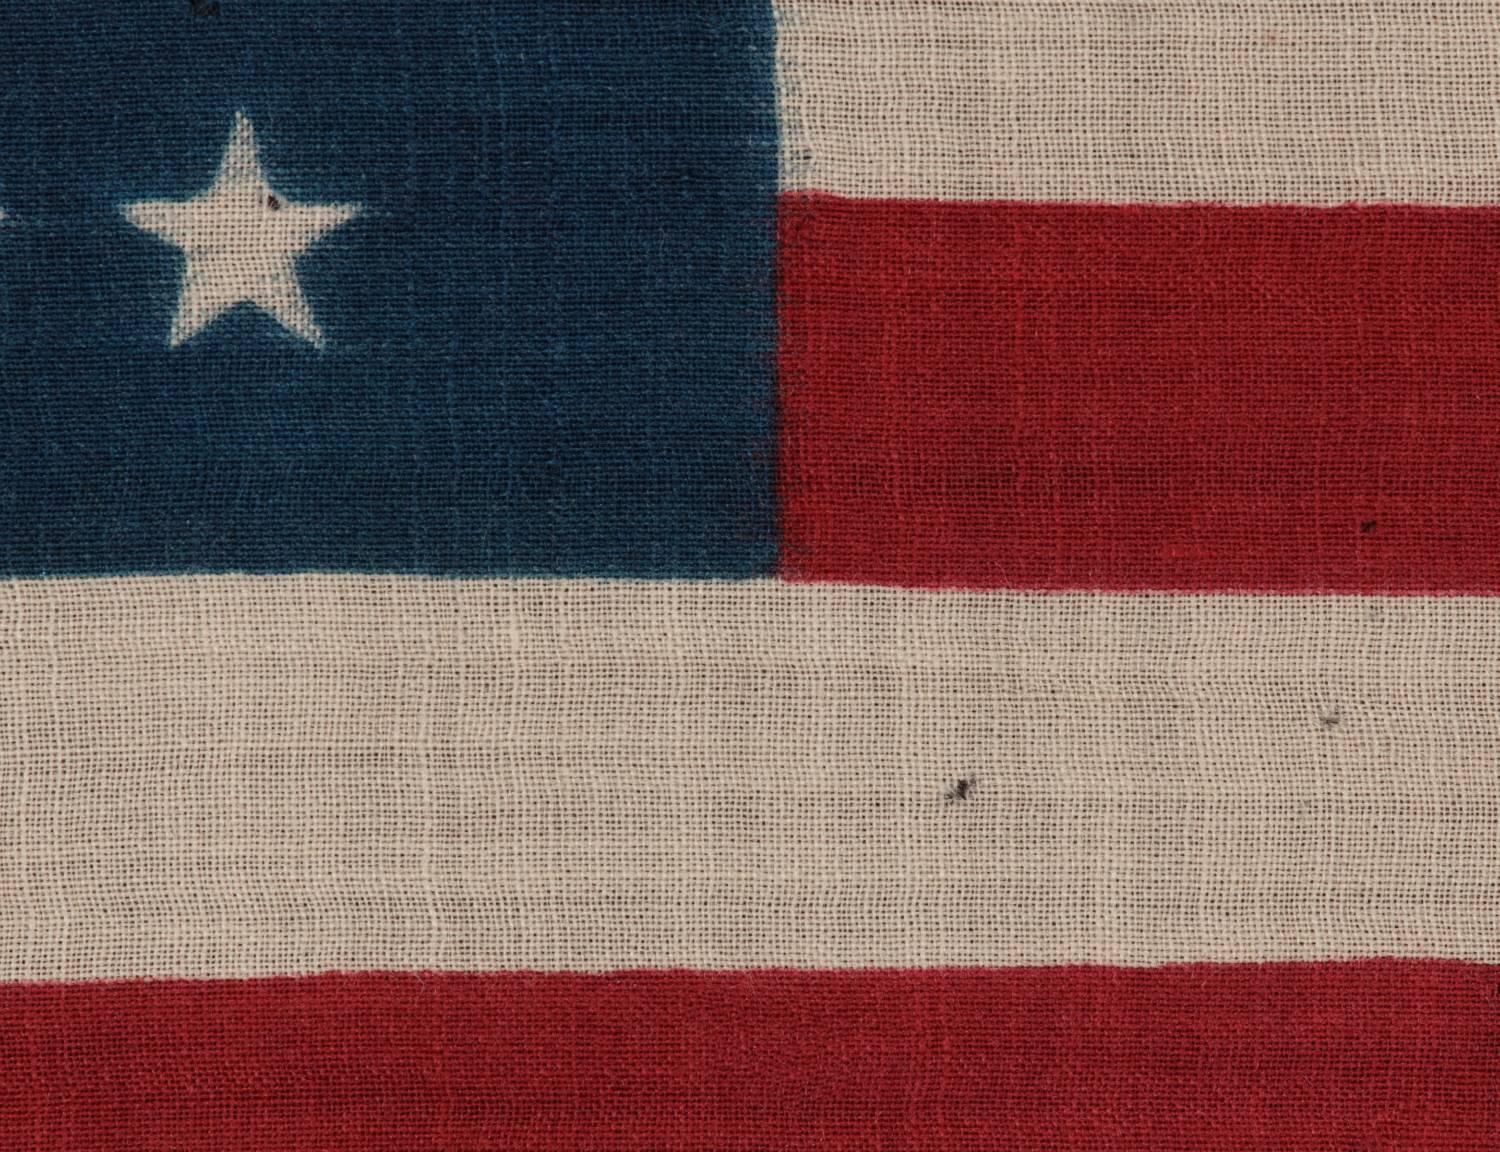 Late 19th Century 44 Stars in Zigzagging Rows on a Press-Dyed Wool American Flag